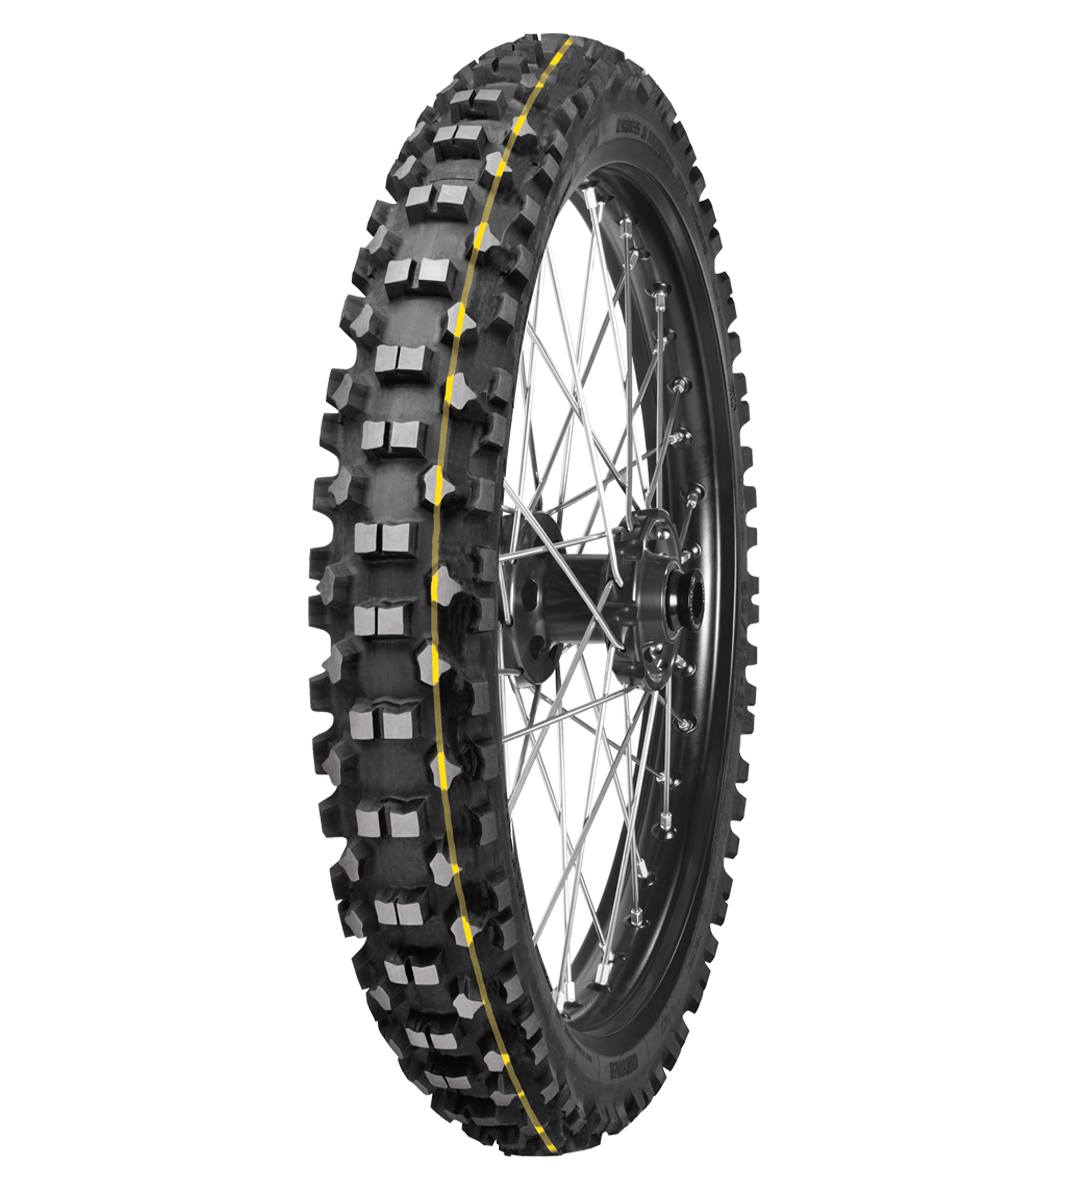 Mitas C-21 STONE KING 90/90-21 Rally Off-Road SUPER 54R Yellow Tube Front Tire, 226654, 90/90-21, C-21 Stone King, Front, Off-Road, Rally, Tires - Imported and distributed in North &amp; South America by Lindeco Genuine Powersports - Premier Powersports Equipment and Accessories for Motorcycle Enthusiasts, Professional Riders and Dealers.